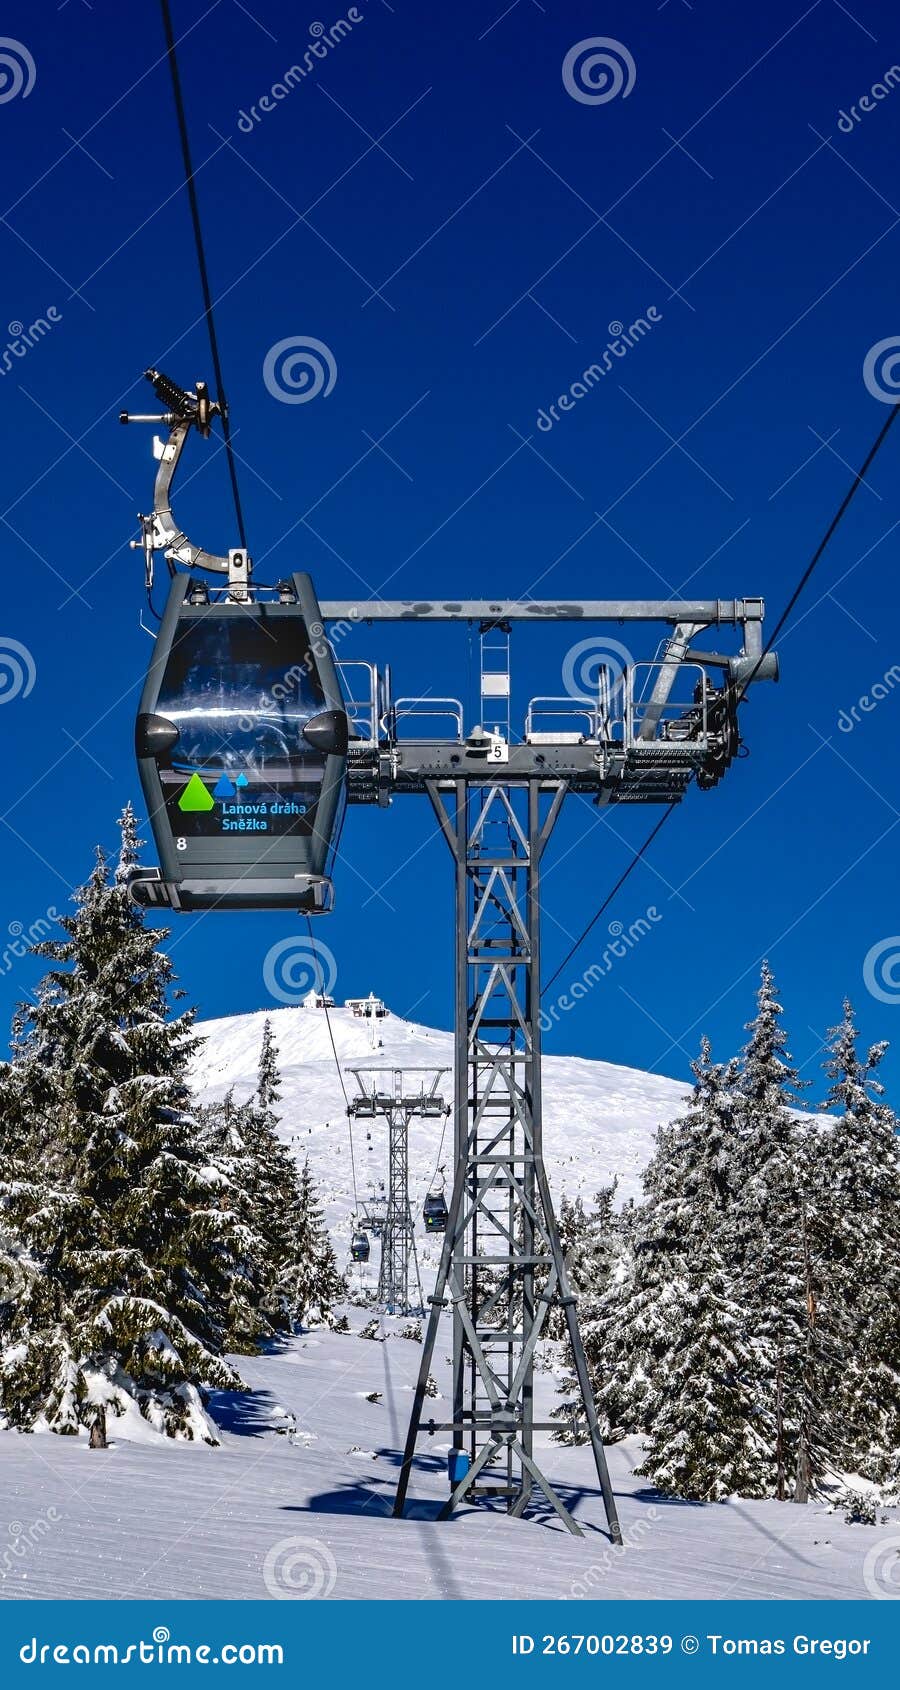 cableway to snezka summit